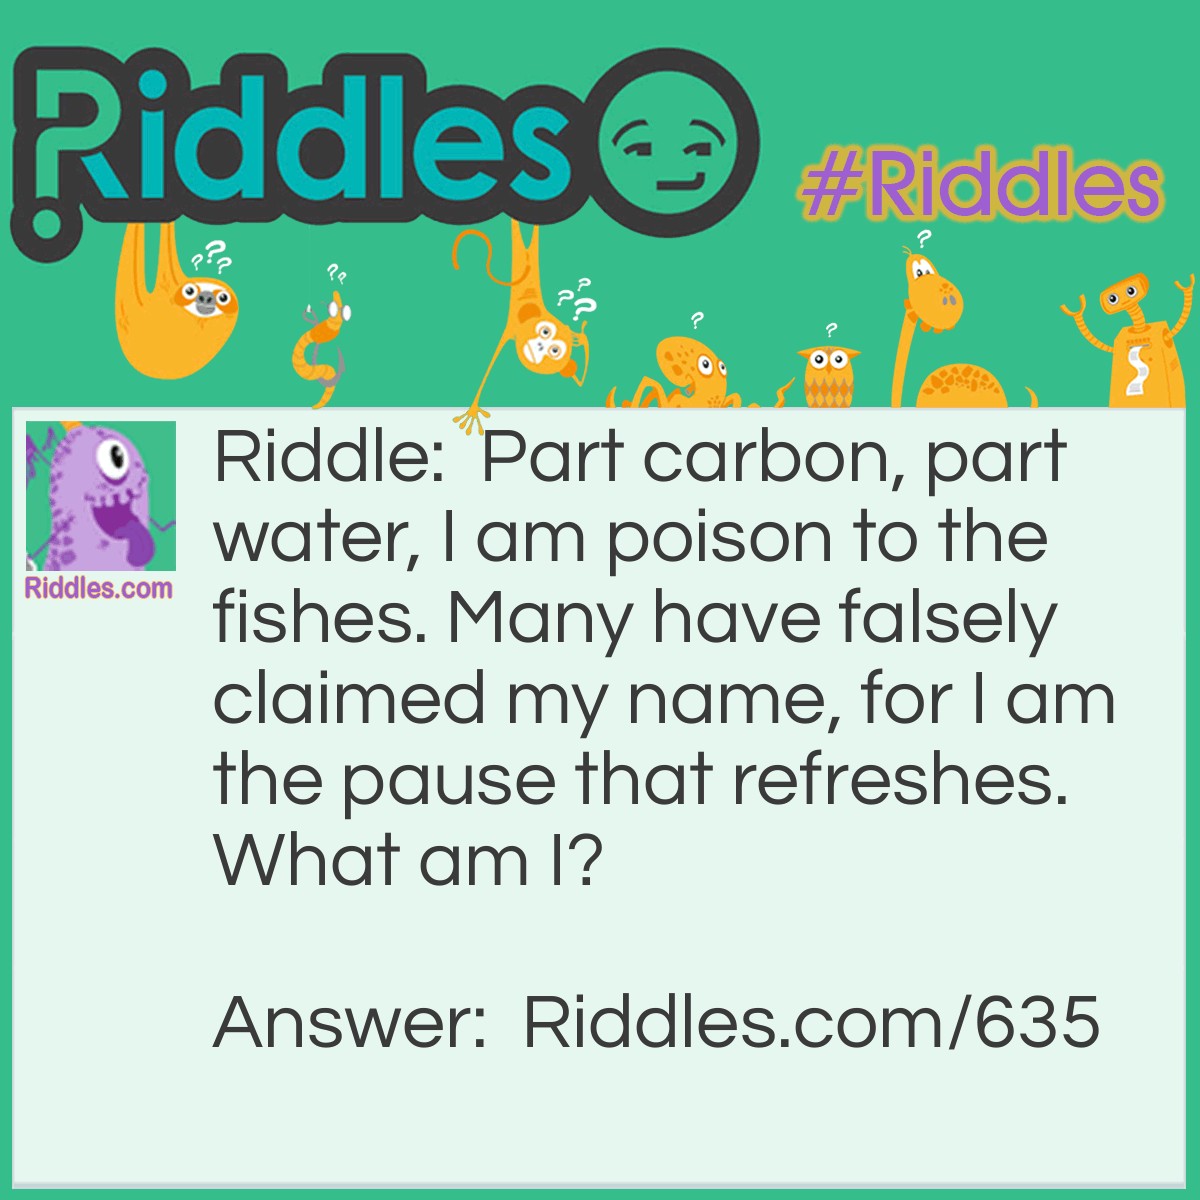 Riddle: Part carbon, part water, I am poison to the fishes. Many have falsely claimed my name, for I am the pause that refreshes.
What am I? Answer: I am Soda Pop!